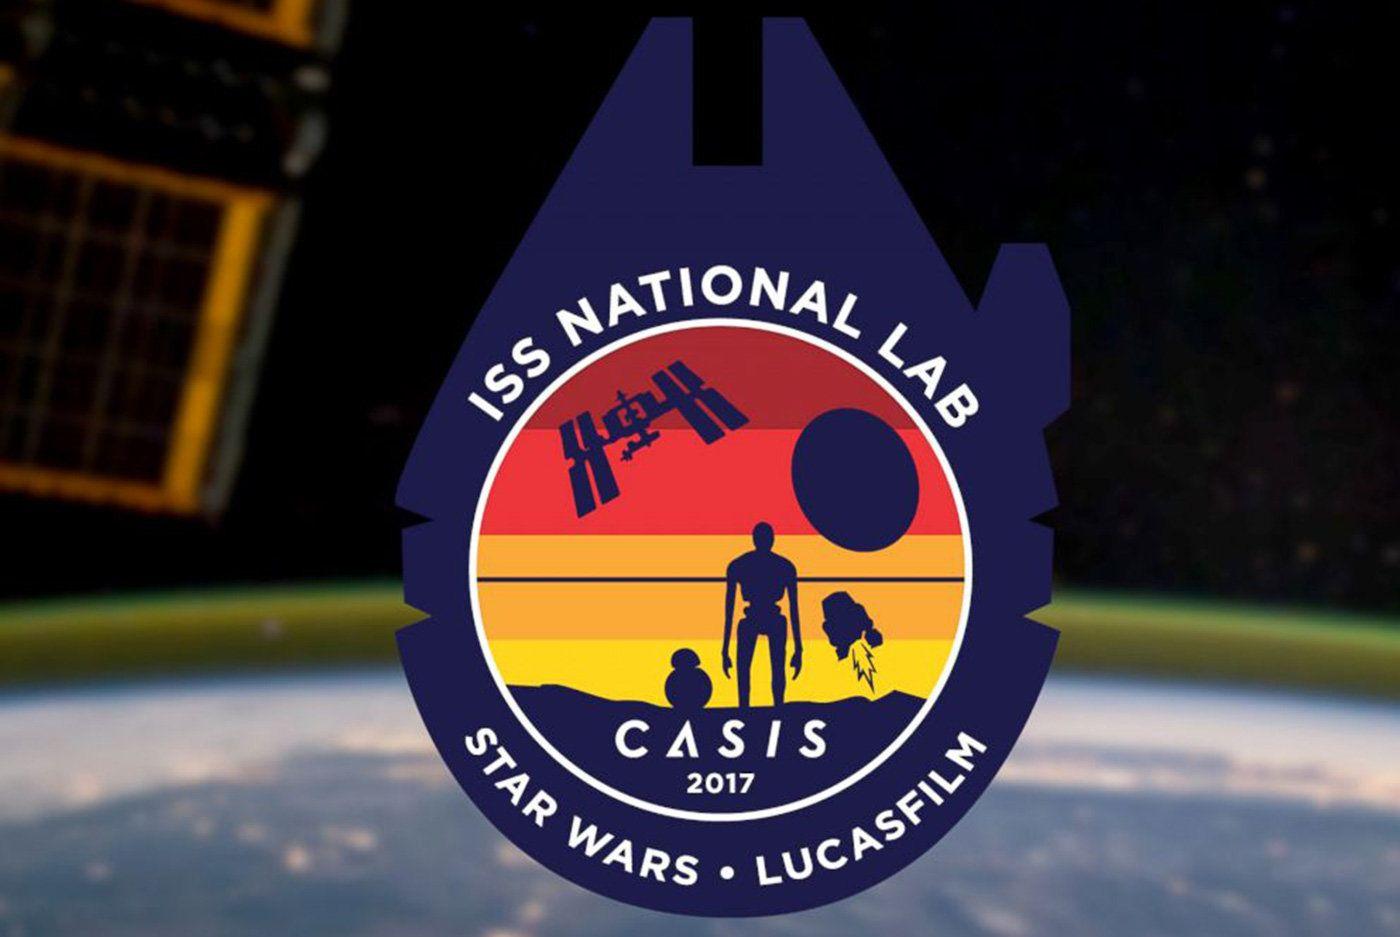 Star Wars NASA Logo - NASA channels 'Stars Wars' for its 2017 ISS mission patch